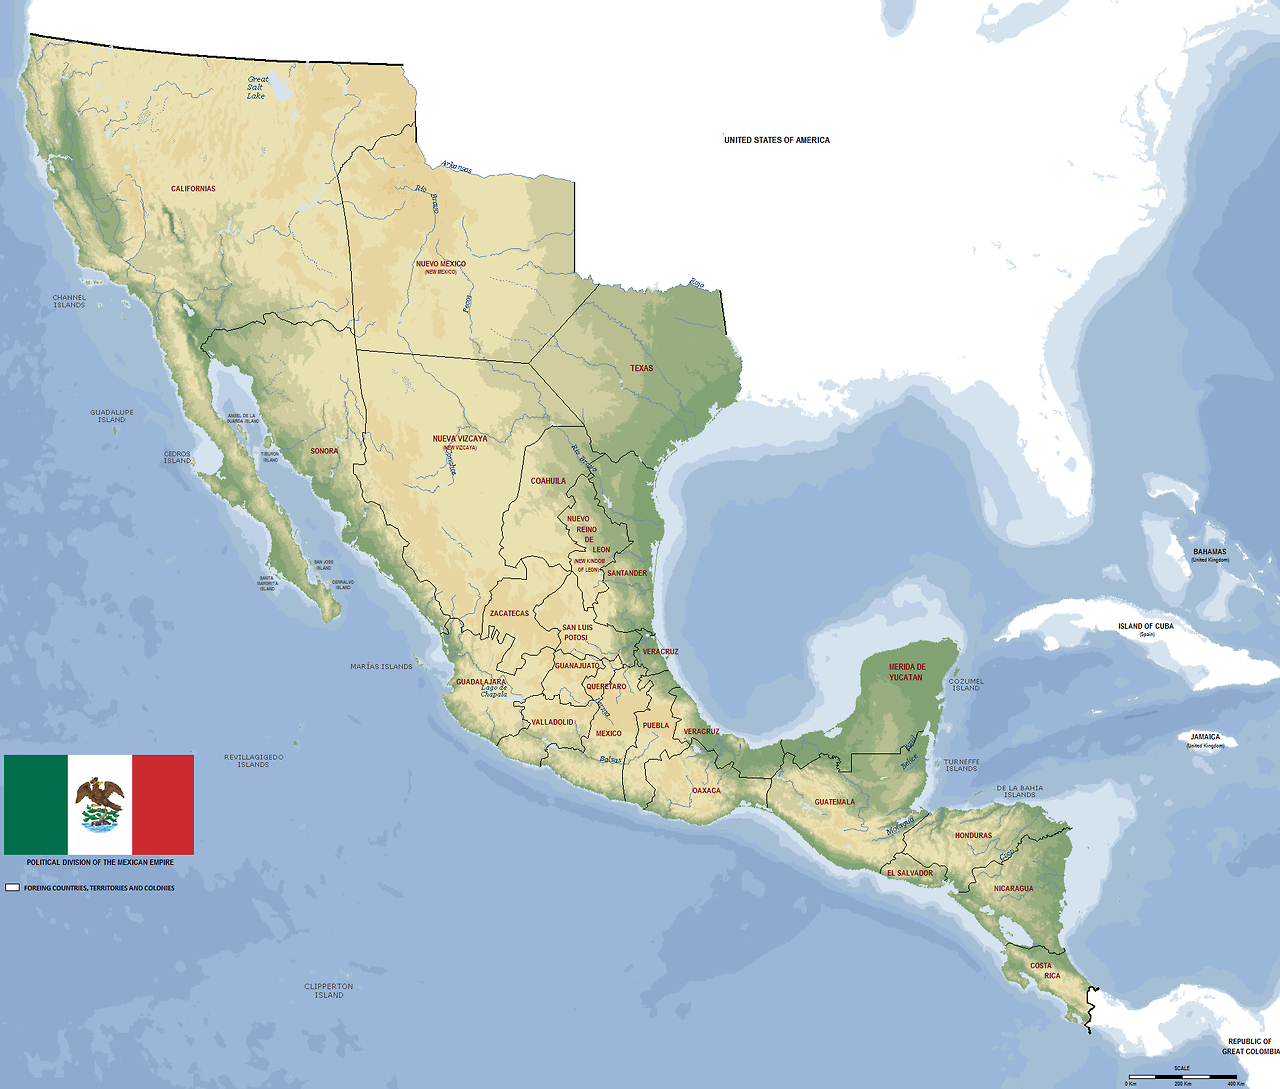 subdivisions-of-the-first-mexican-empire-1821-maps-on-the-web